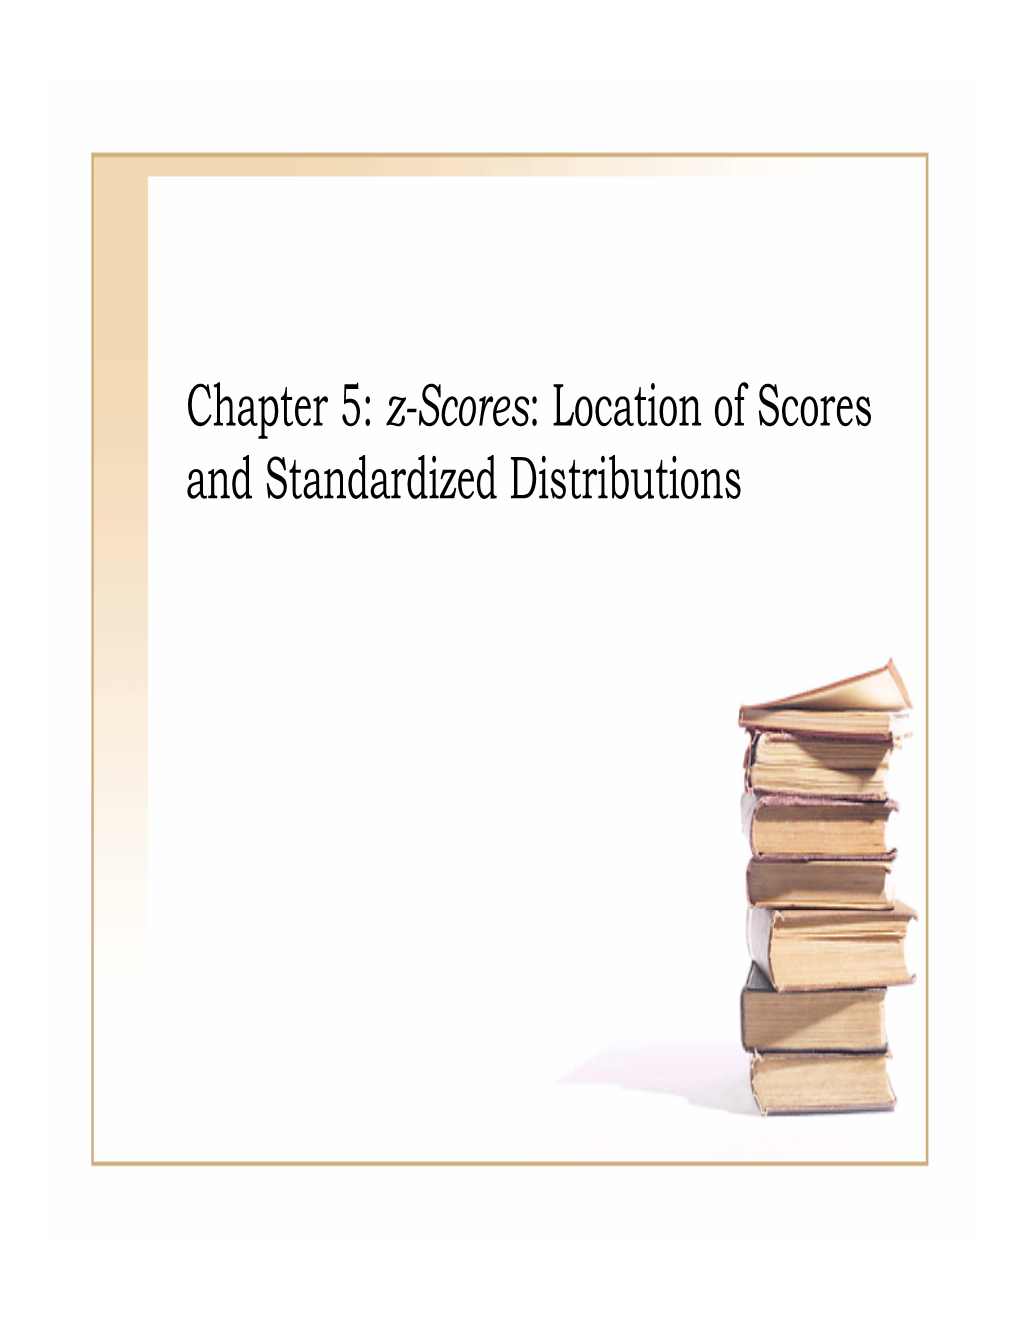 Chapter 5: Z-Scores: Location of Scores and Standardized Distributions Itintrod Ucti on to Z-Scores